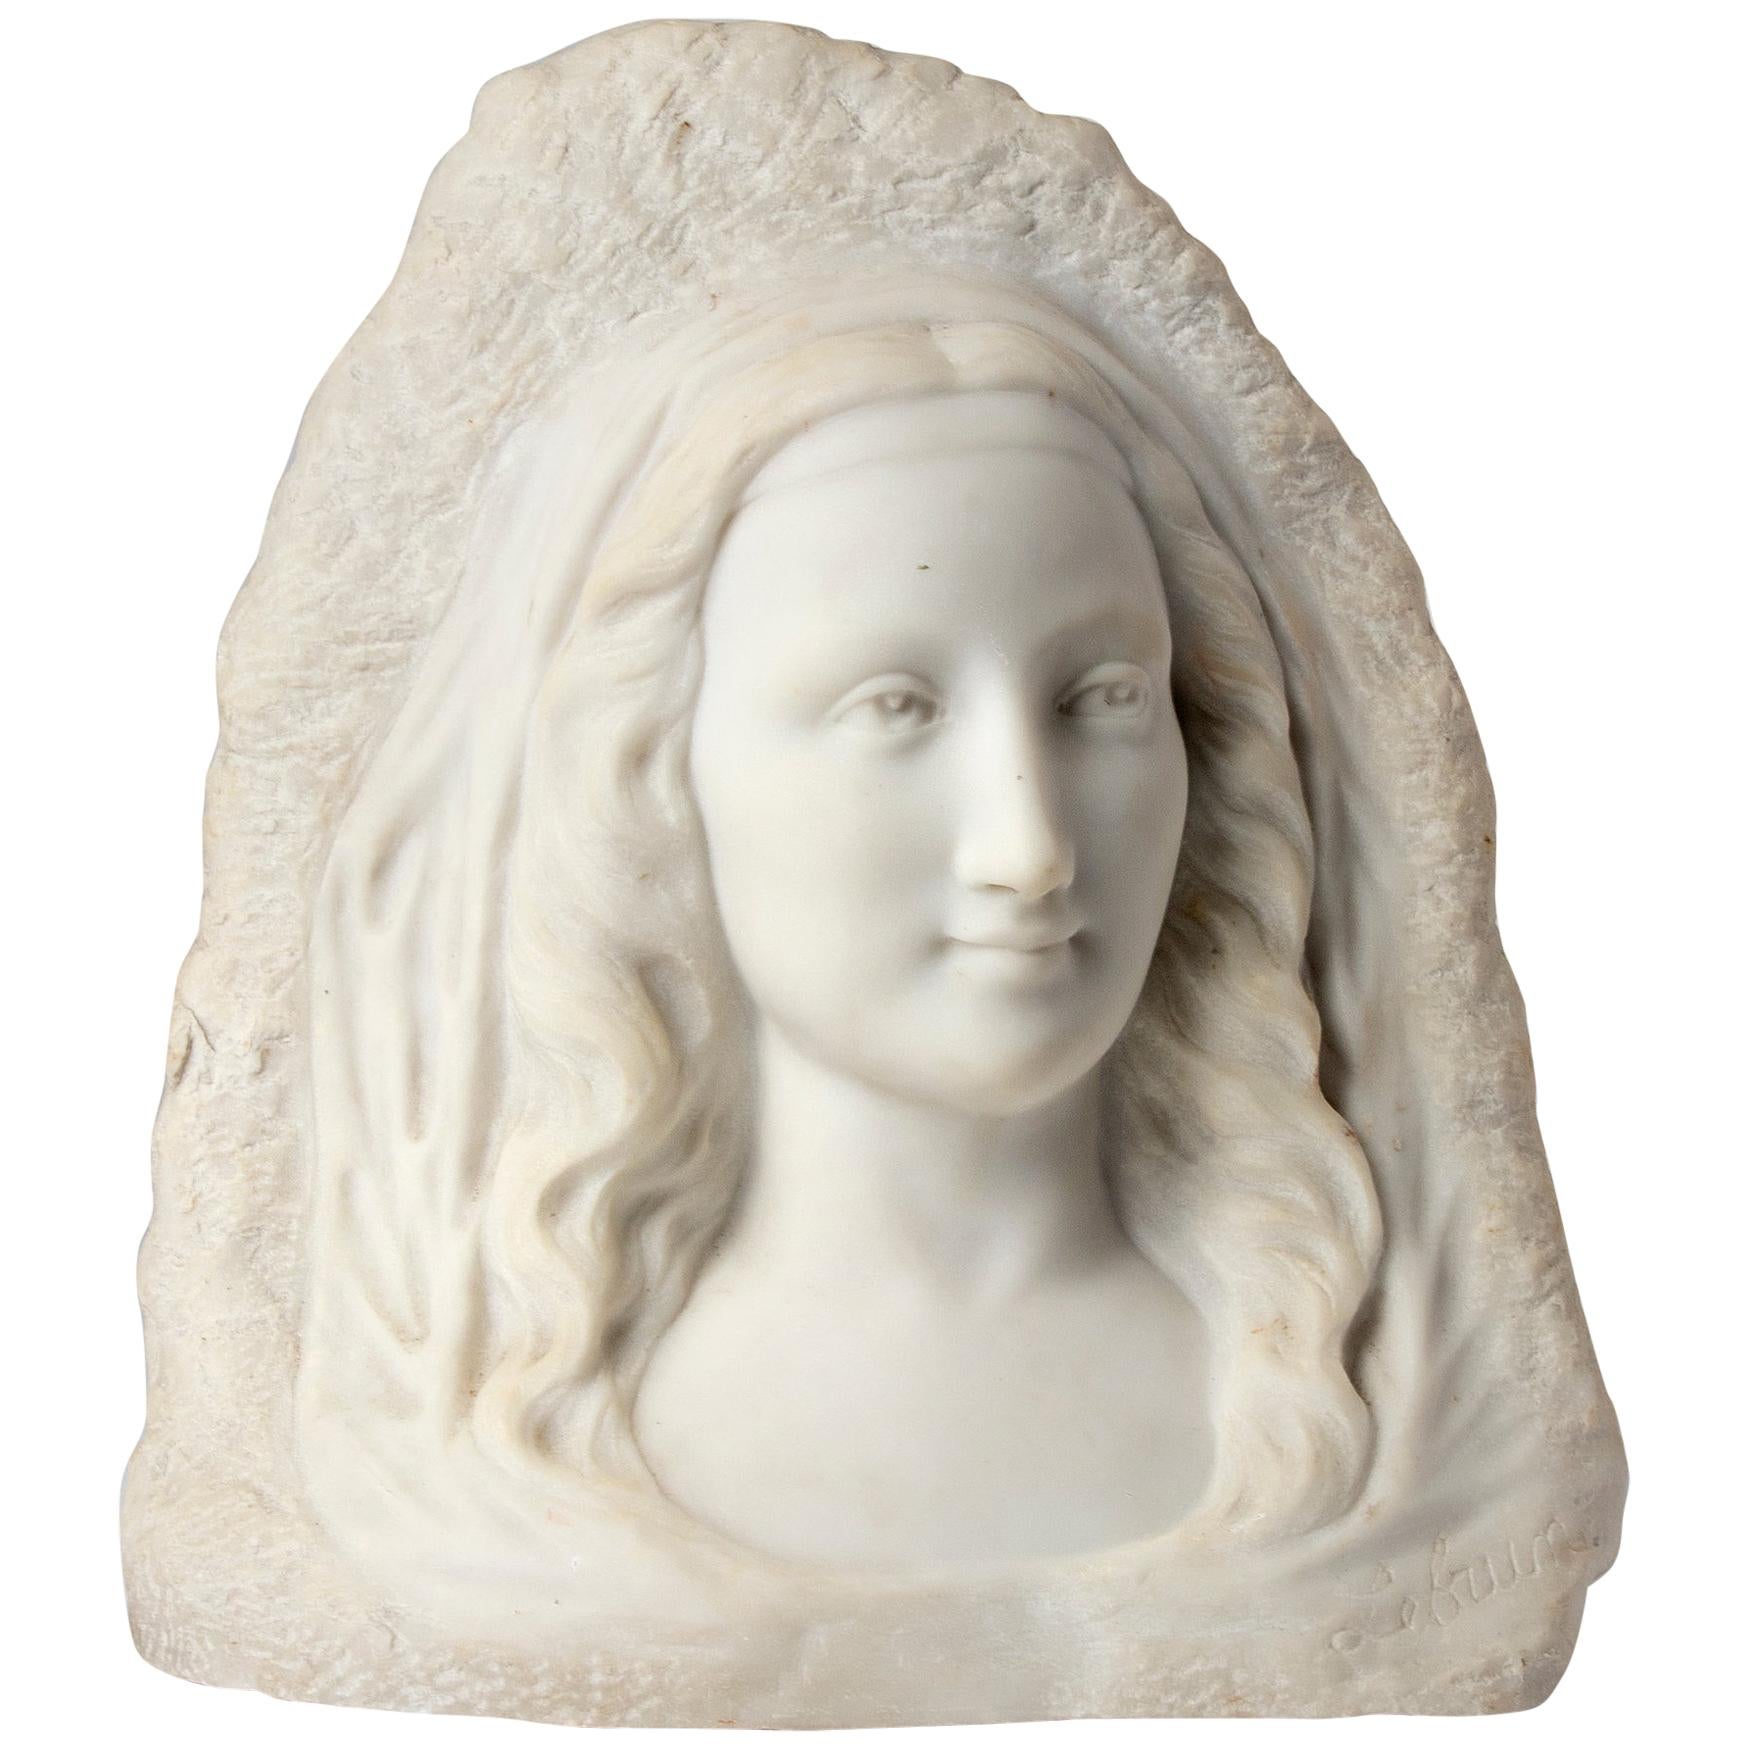 French 19th Century Carrara Marble Sculpture Portrait of Woman, Signed LeBrun